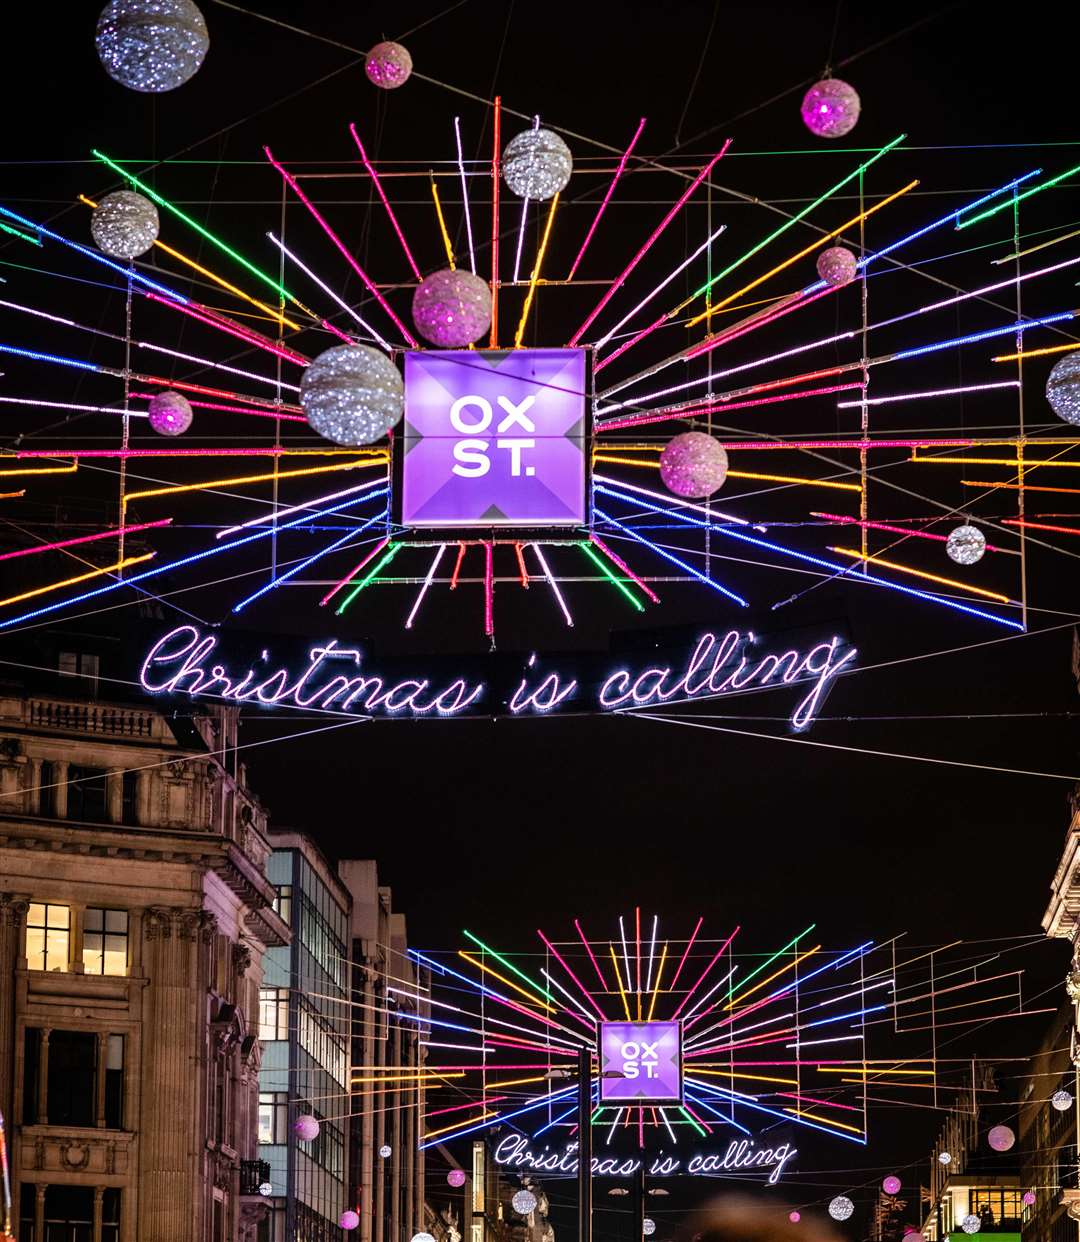 Oxford Street officially launched the Christmas shopping season in the West End Picture: John Nguyen/PA Wire